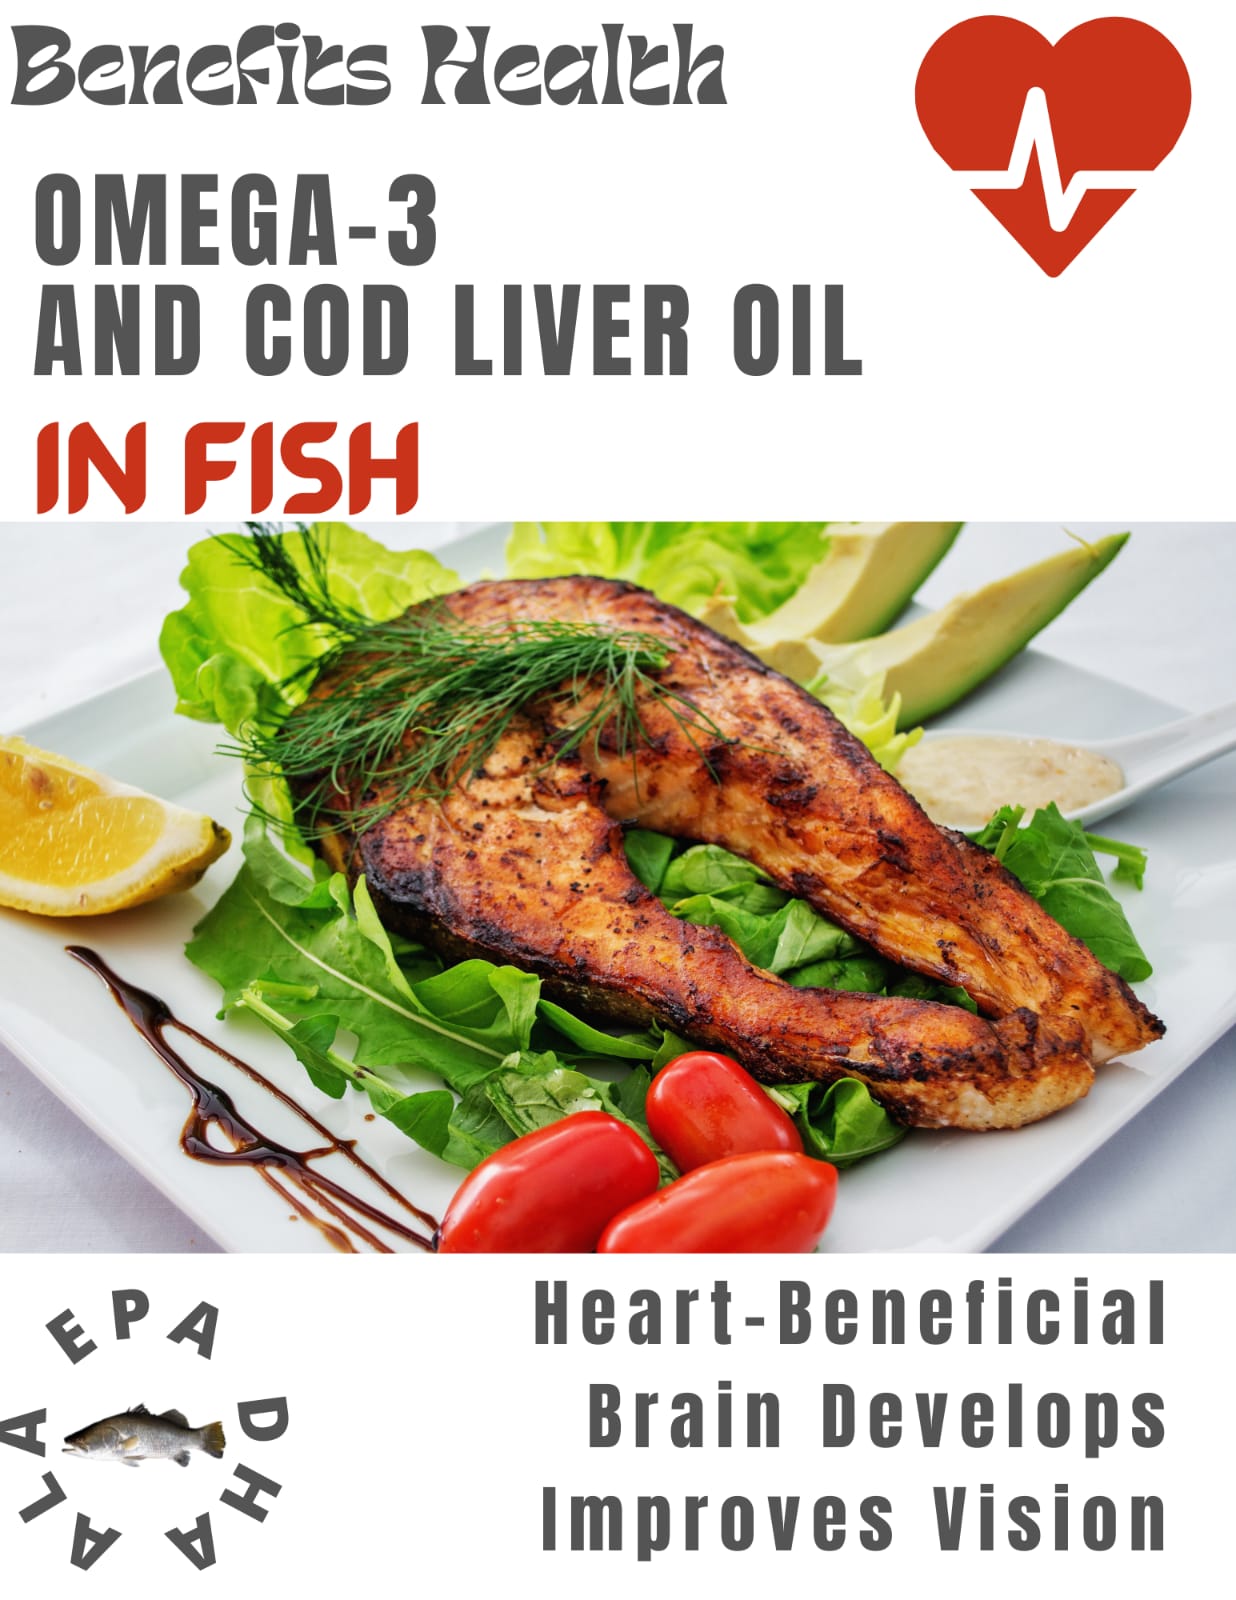 Fish contains Omega−3 fatty acids, also known as Omega 3-oils, are polyunsaturated fatty acids, and plays an important role in benefitting human health. Fish also contains cod liver oil inherits additional nutrients like vitamin-A, vitamin-D, and fish oil, riboflavin (B2), phosphorus, calcium, potassium, zinc, iodine, iron, magnesium etc.